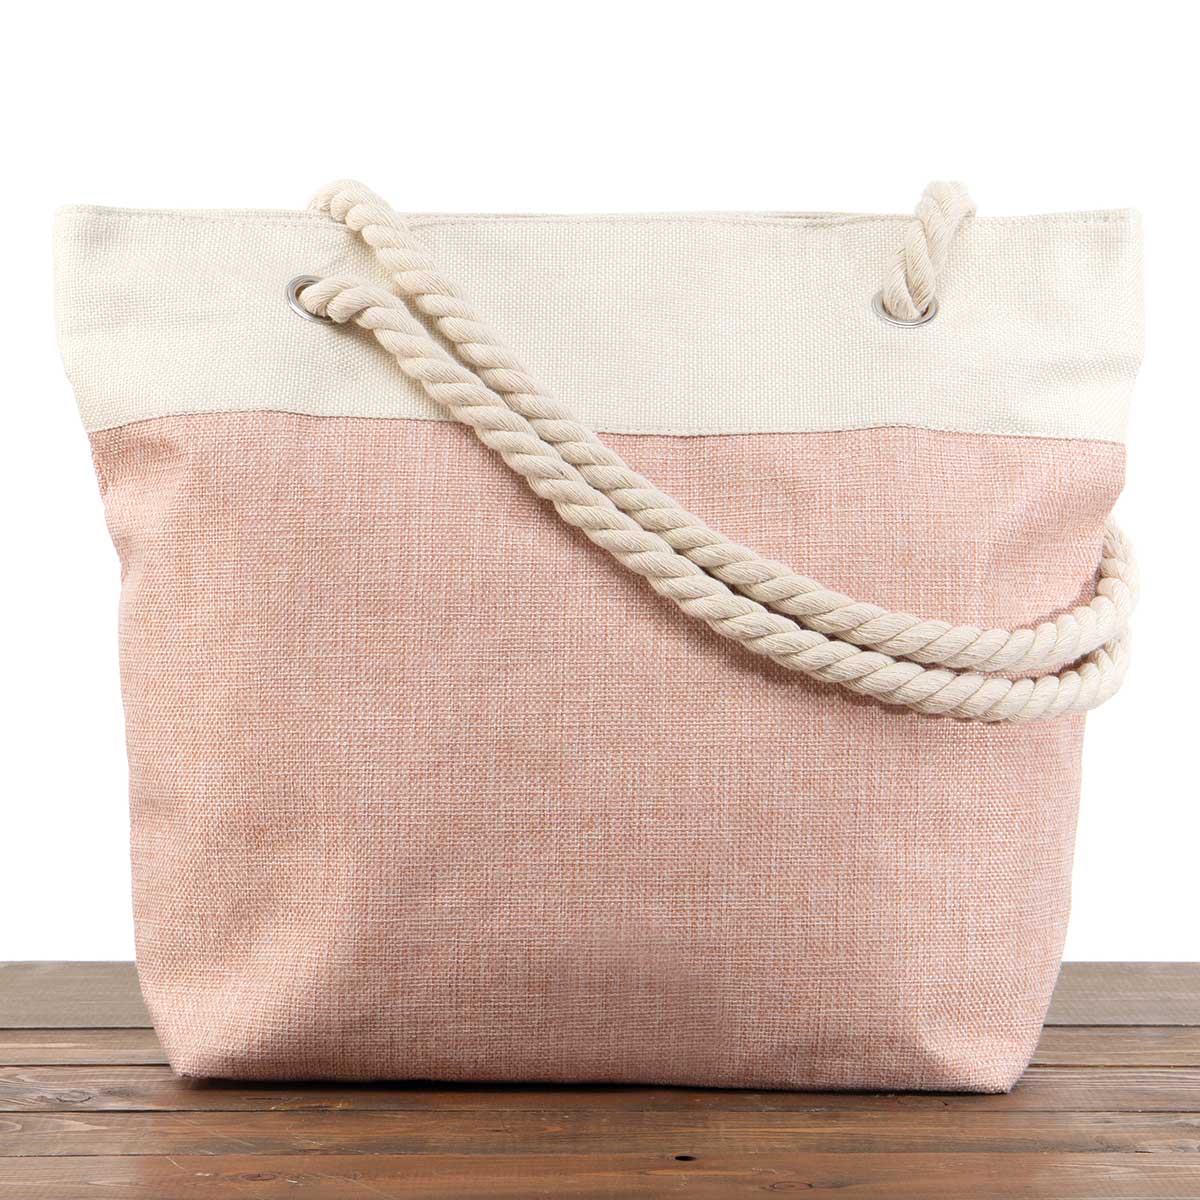 Blush Canvas Summer Bag 17.5"x5"x14" with 10" Rope Shoulder Stra